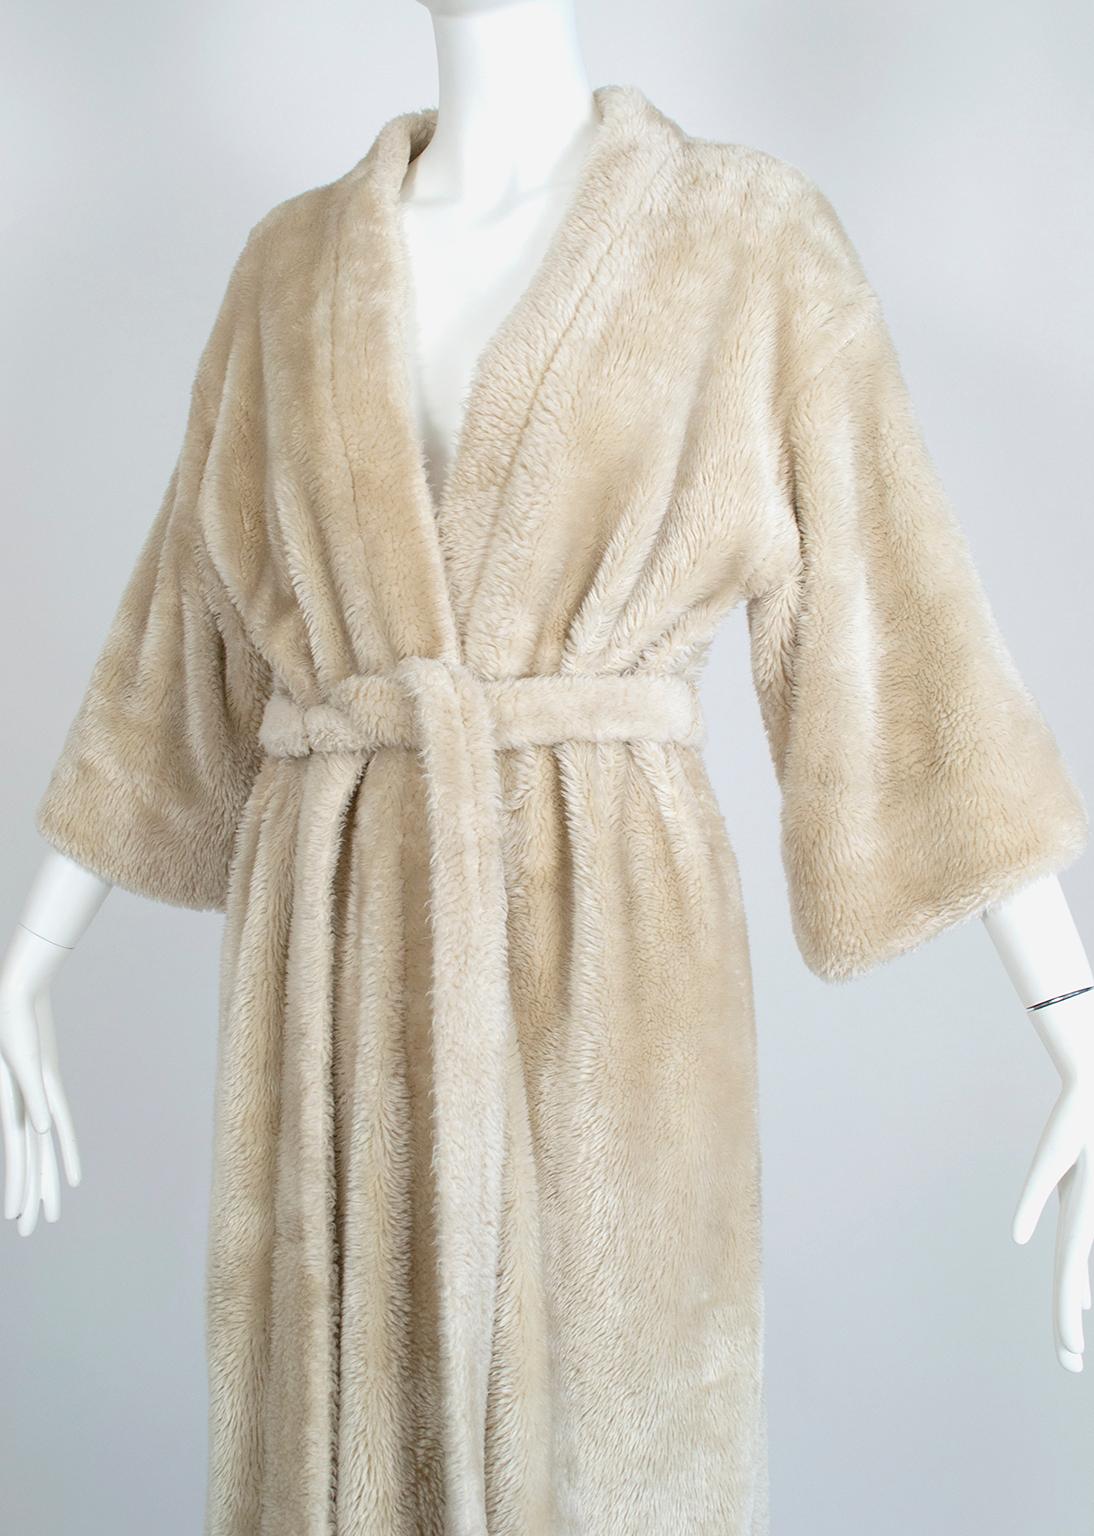 Reversible Ivory Faux Fur Robe w Leonard Paris-Inspired Jungle Lining - M, 1960s For Sale 3